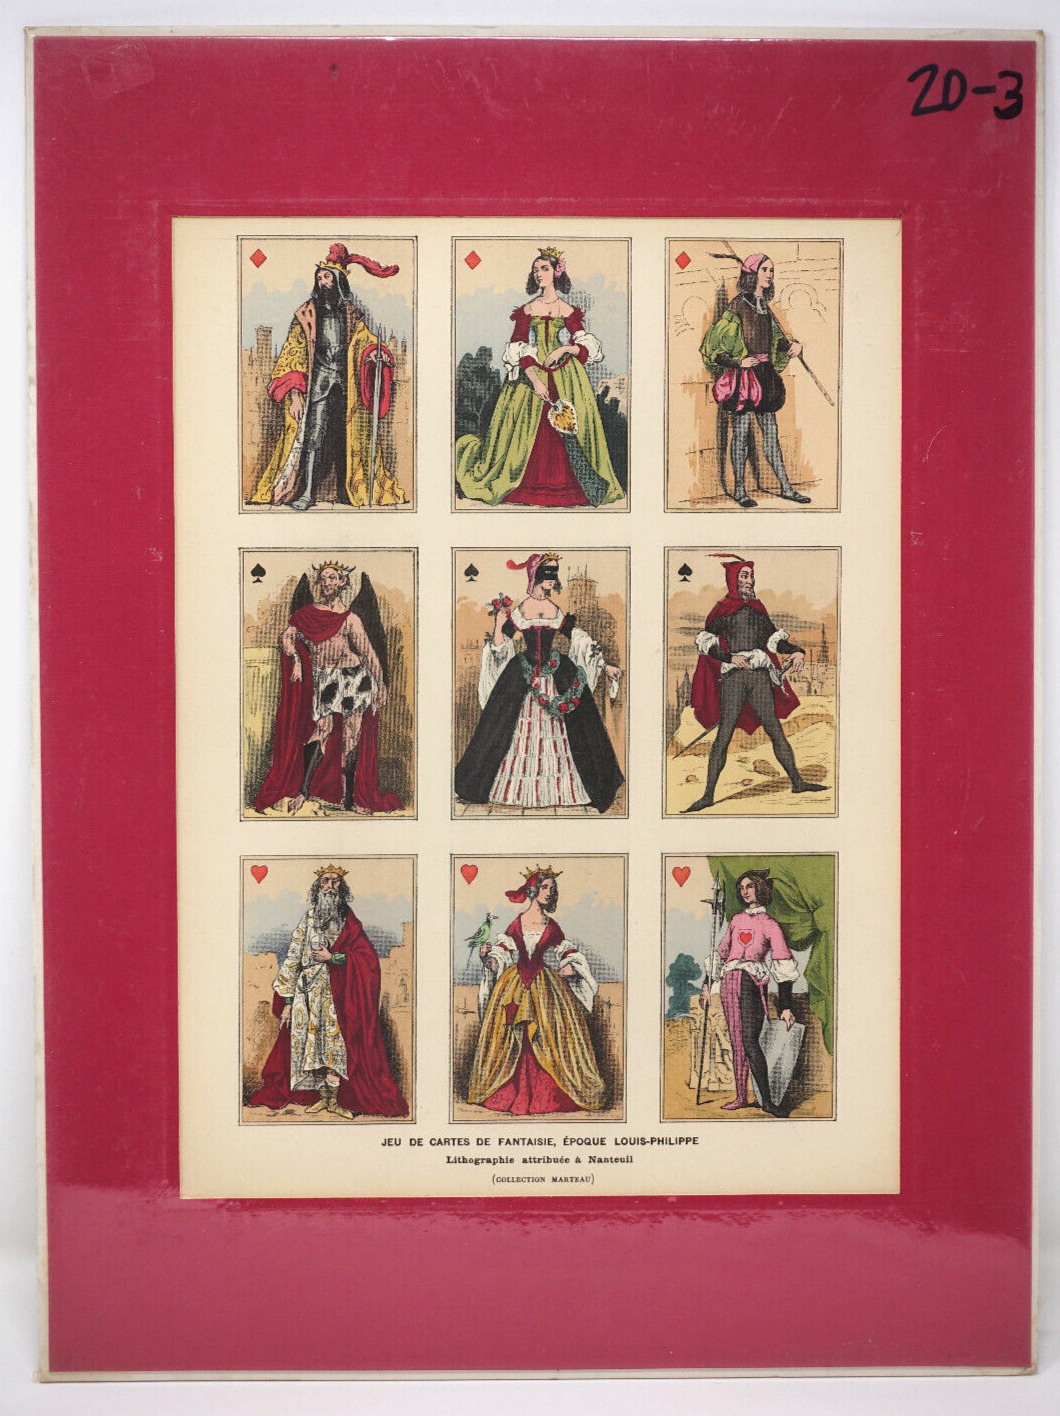 The D'Allemagne Book of 1906 Original Page Epoque Louis-Philippe Playing Cards